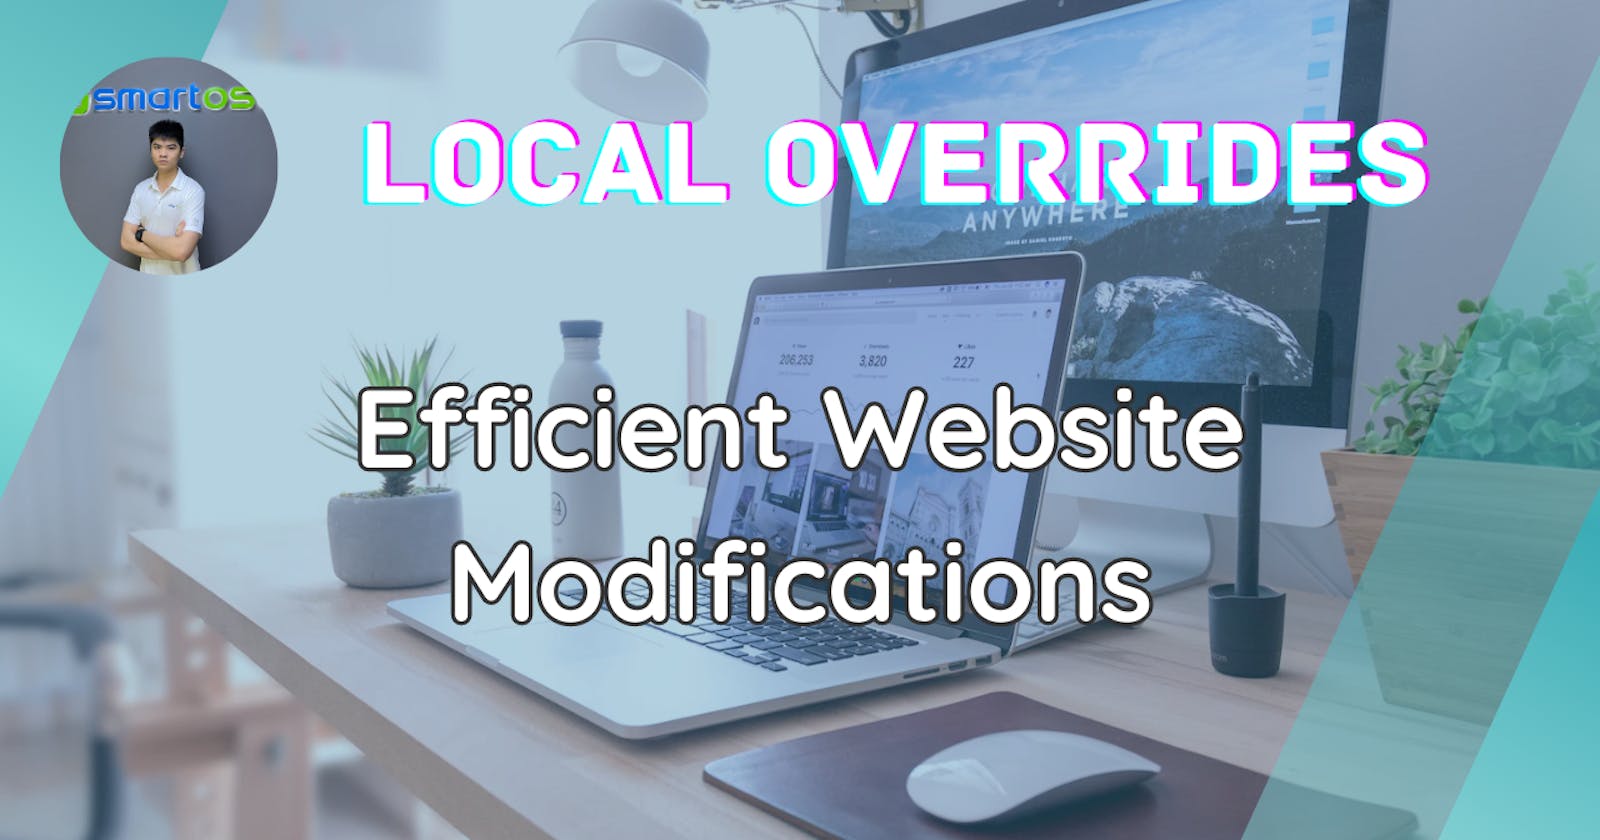 How to Use Local Overrides in DevTools for Efficient Website Modifications